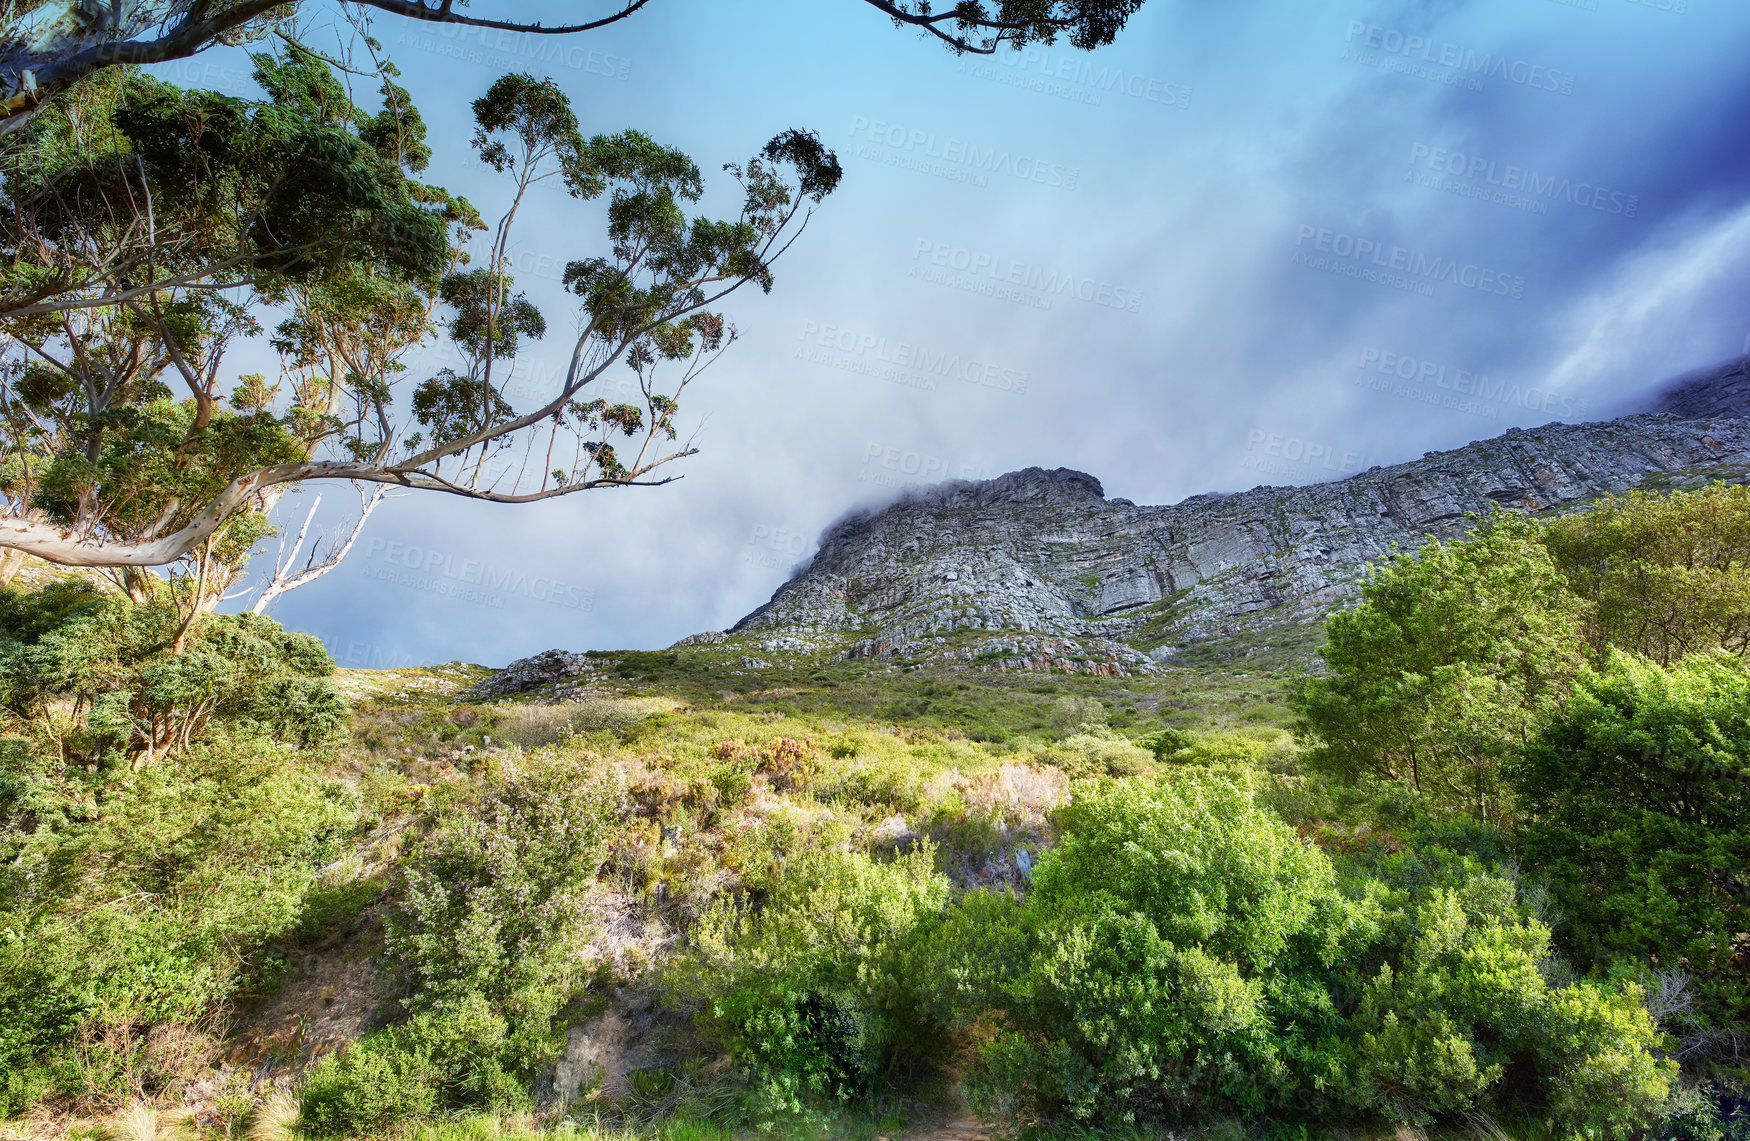 Buy stock photo Copy space with scenic landscape of cloudy sky covering the peak of Table Mountain in Cape Town on a misty morning from below. Beautiful views of plants and trees around an iconic natural landmark